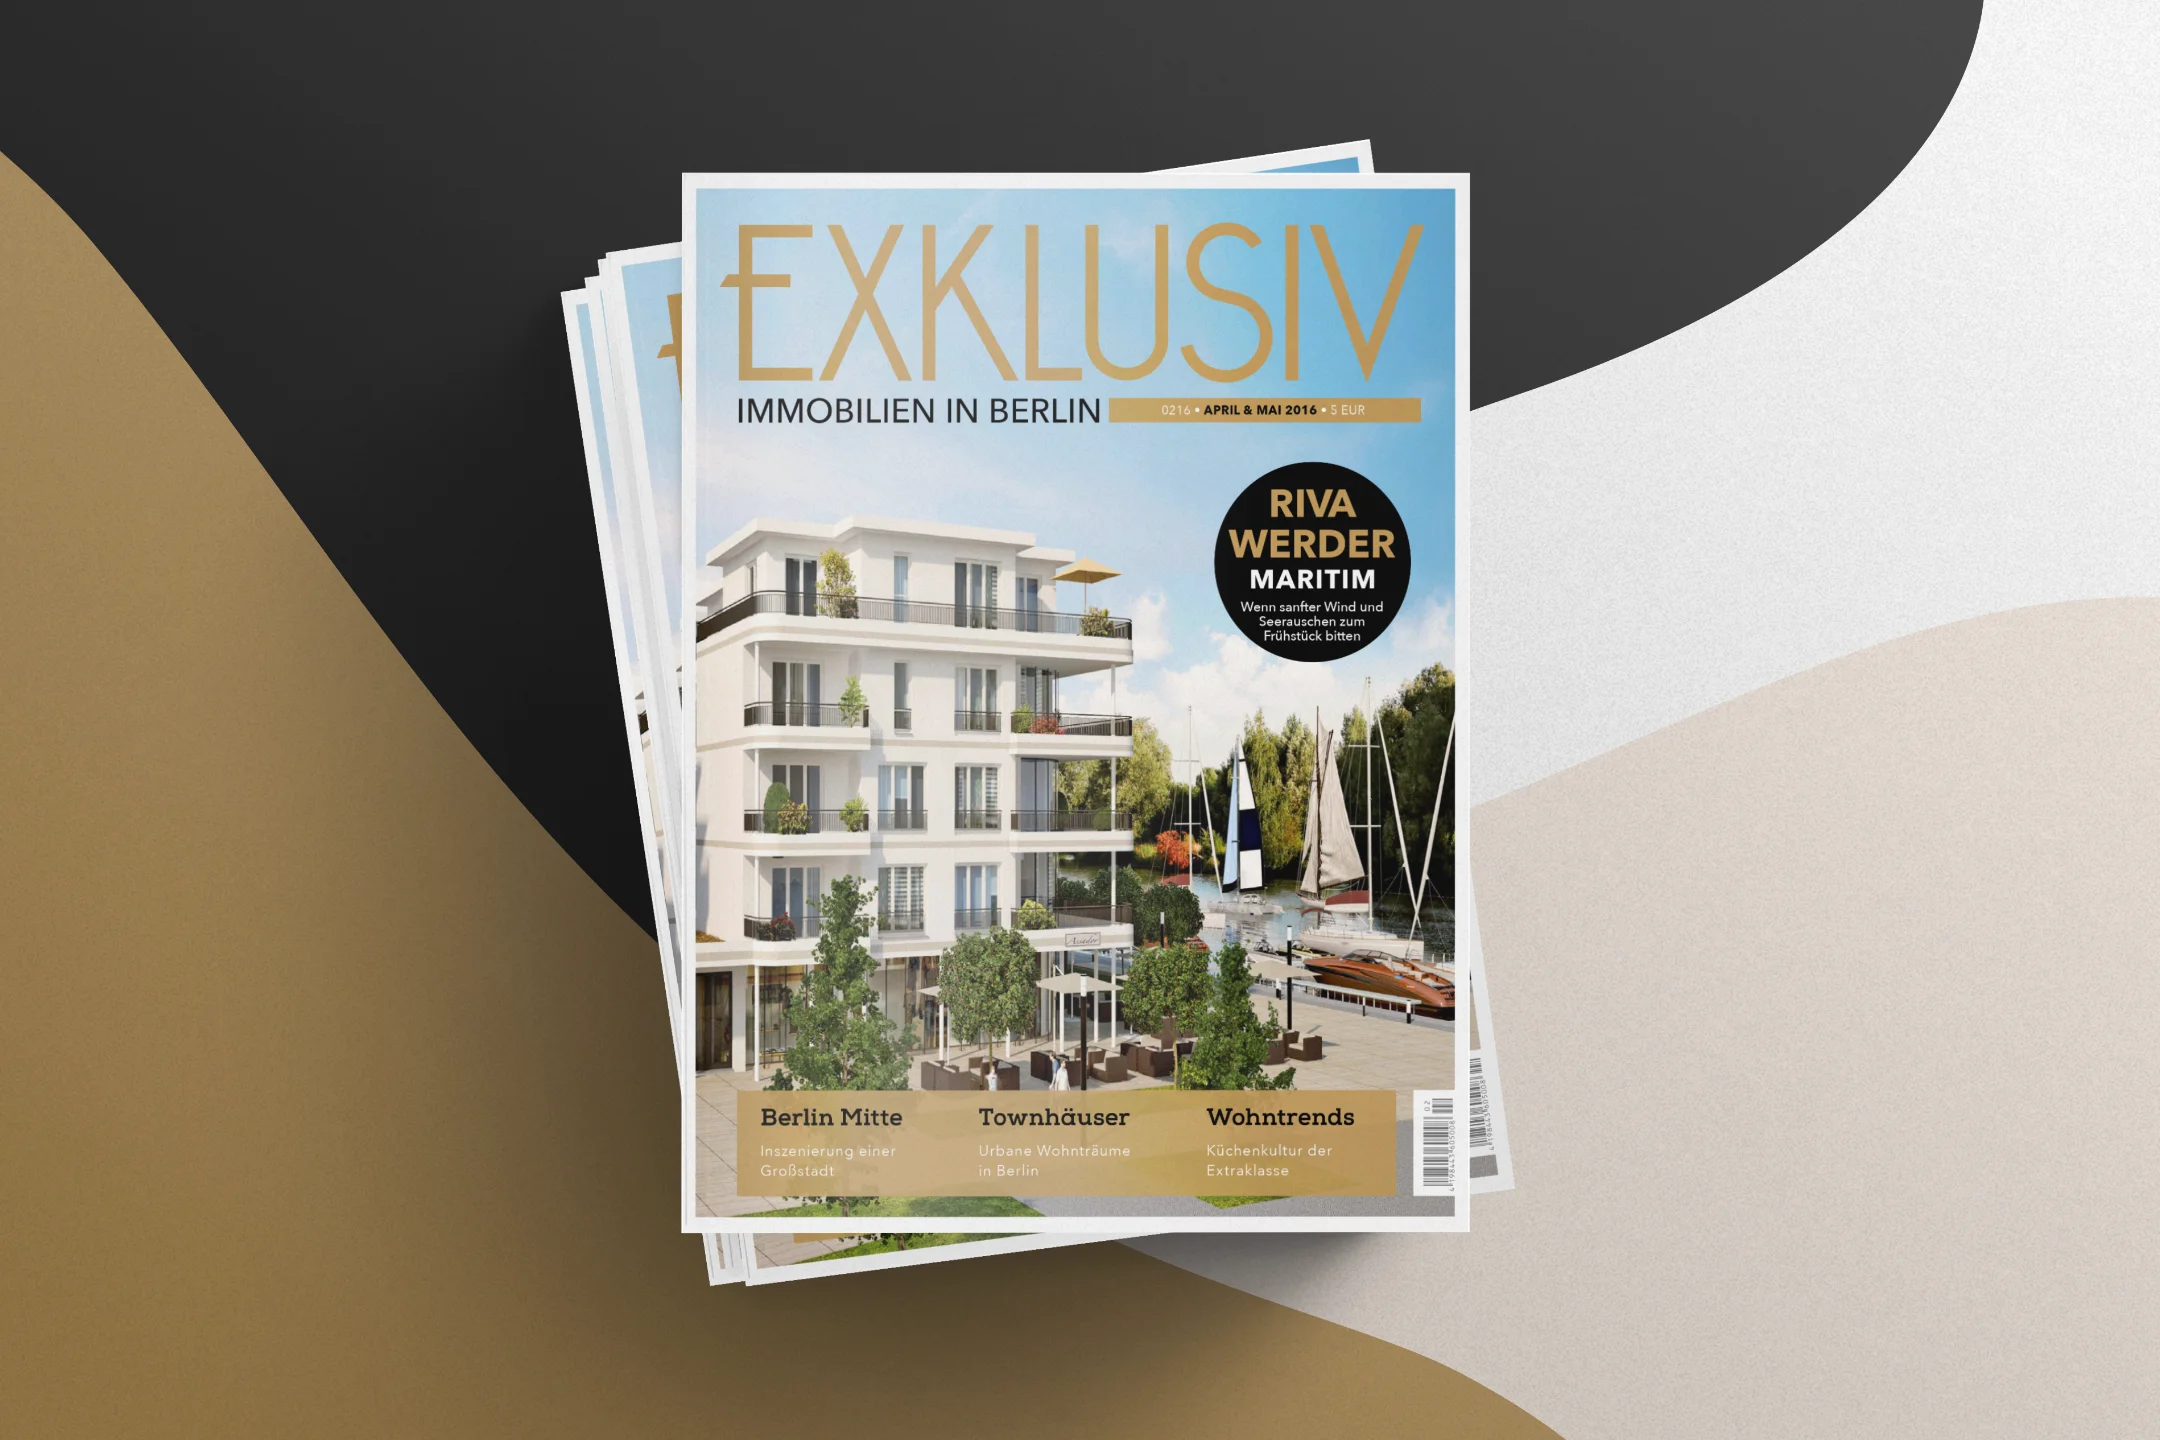 Introduction image for EXKLUSIV Immobilien in Berlin case study